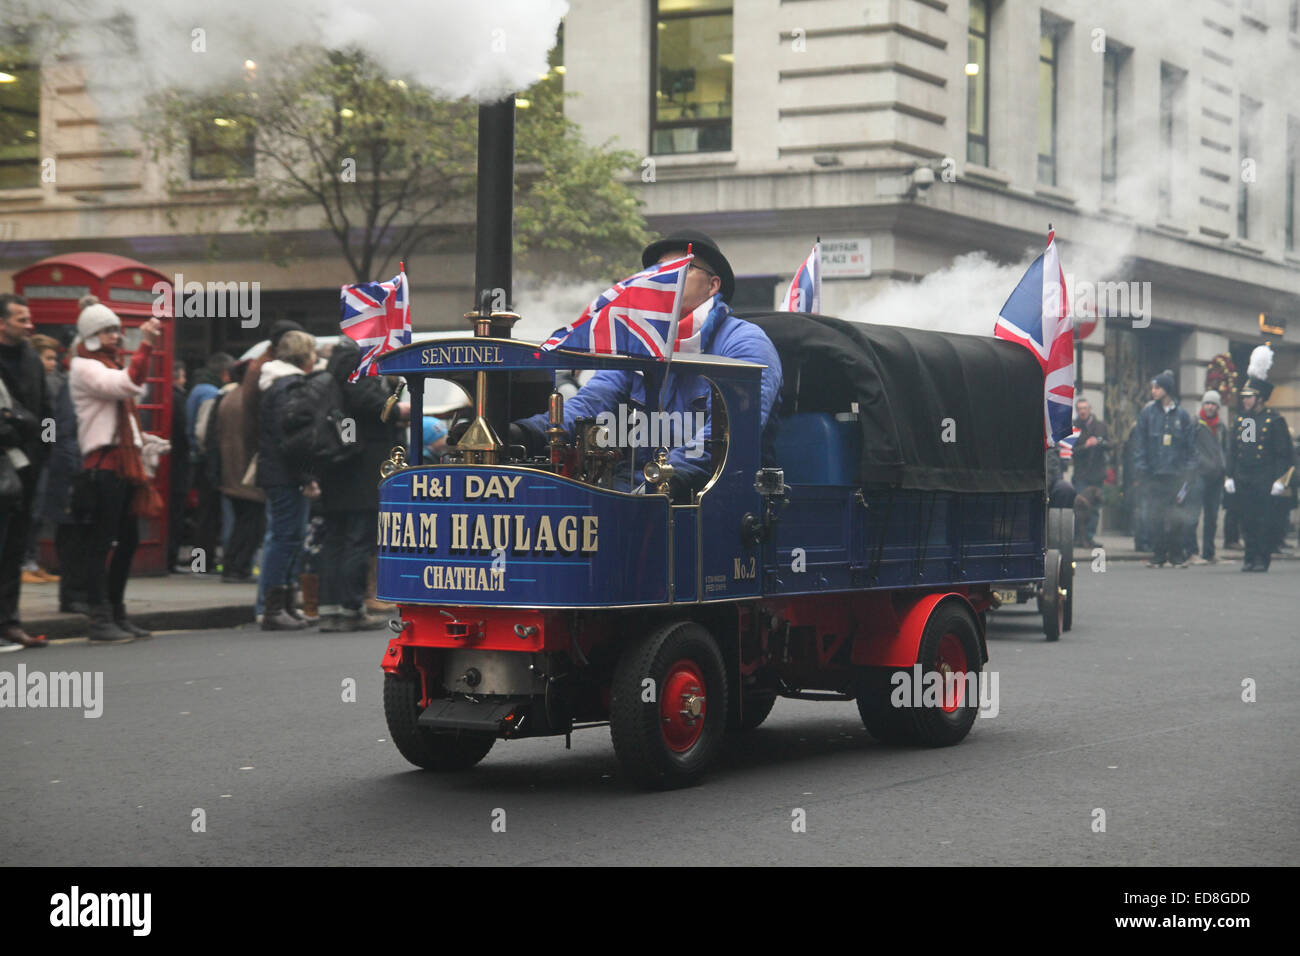 London, UK. 1 January 2015. An operator attends to his mini steam engine. Londoners and tourists turned up in droves for the new years parade. The annual parade goes through Piccadilly, Regents street, Pall Mall and Whitehall a 2 mile route. Photo: David Mbiyu/ Alamy Live News Stock Photo